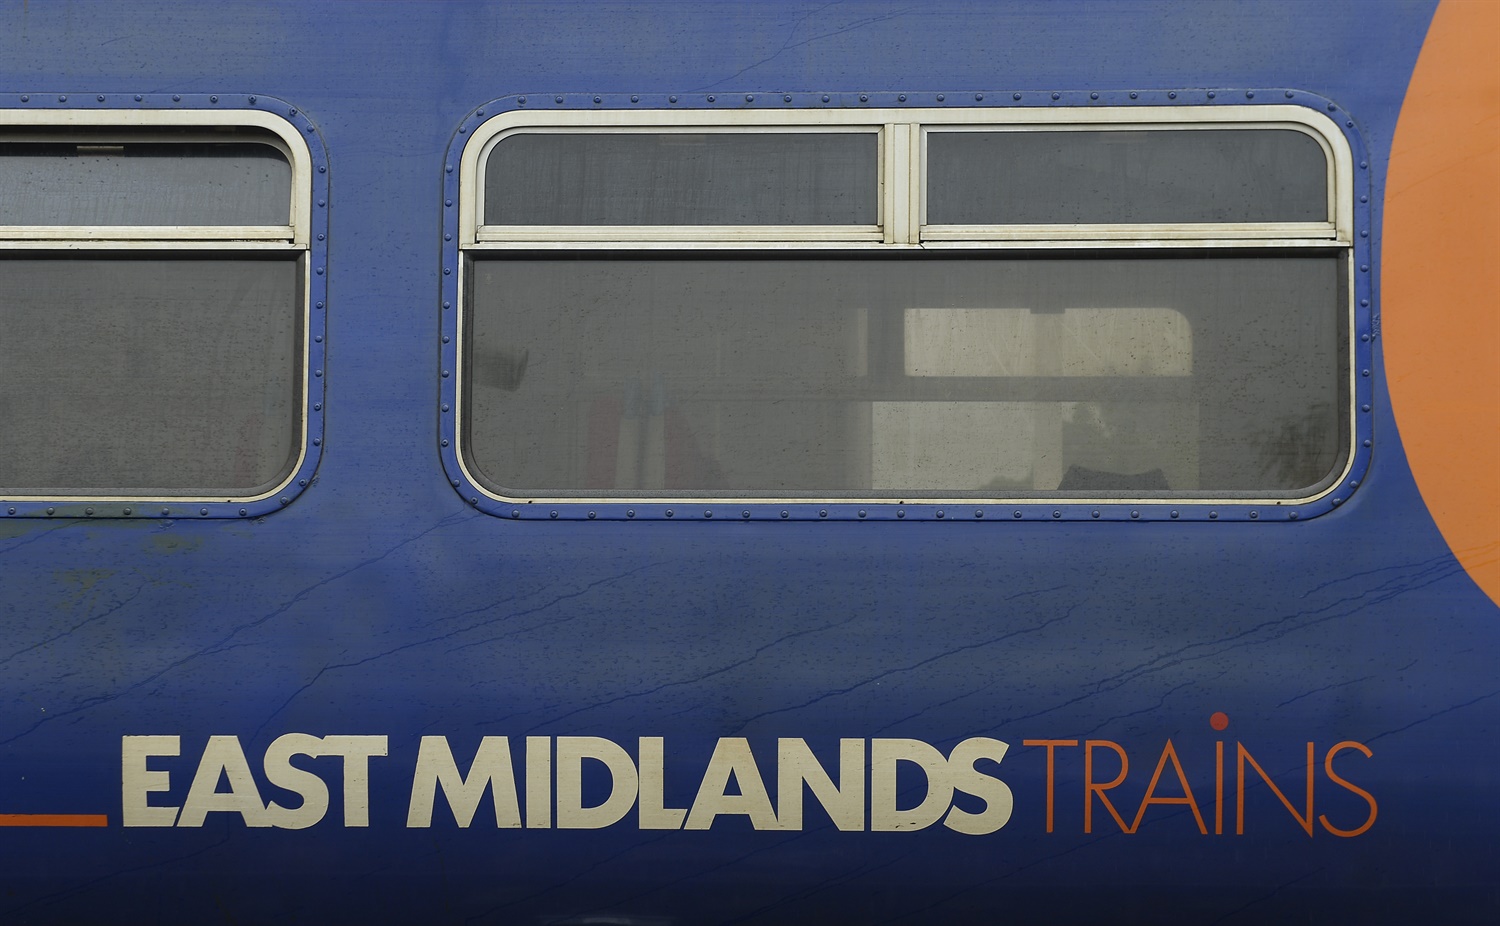 Stagecoach secures East Midlands Trains franchise extension with DfT until August